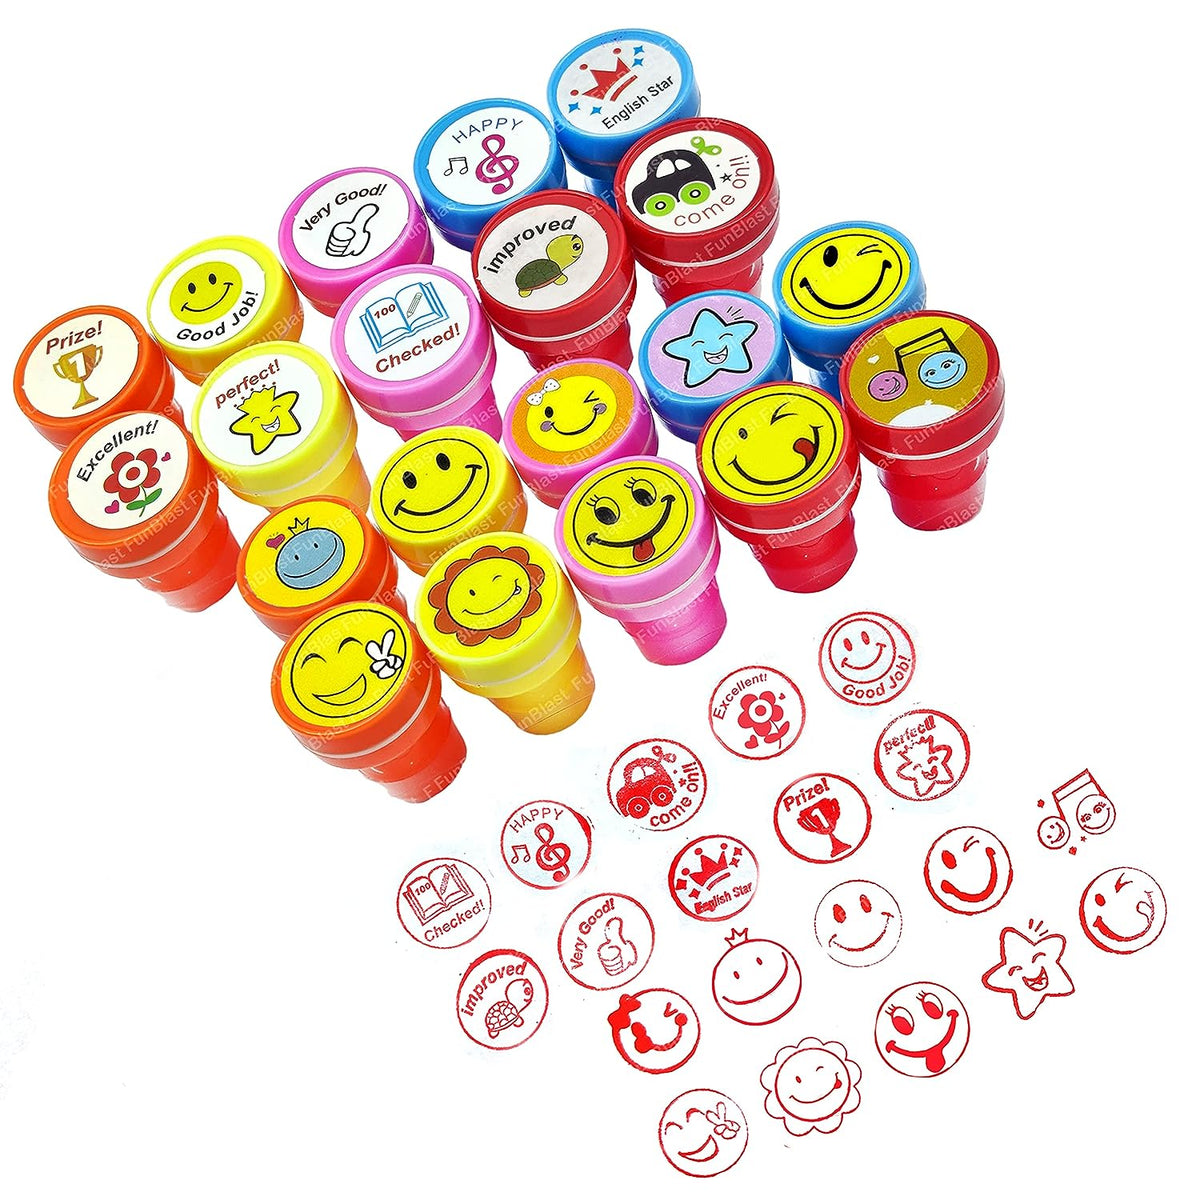 10 Emoji and 10 Motivation Stamper for Kids - Educational Toys Art and Craft School Supplies Set of 20 Learning Toys for Kids/Boys/Girls